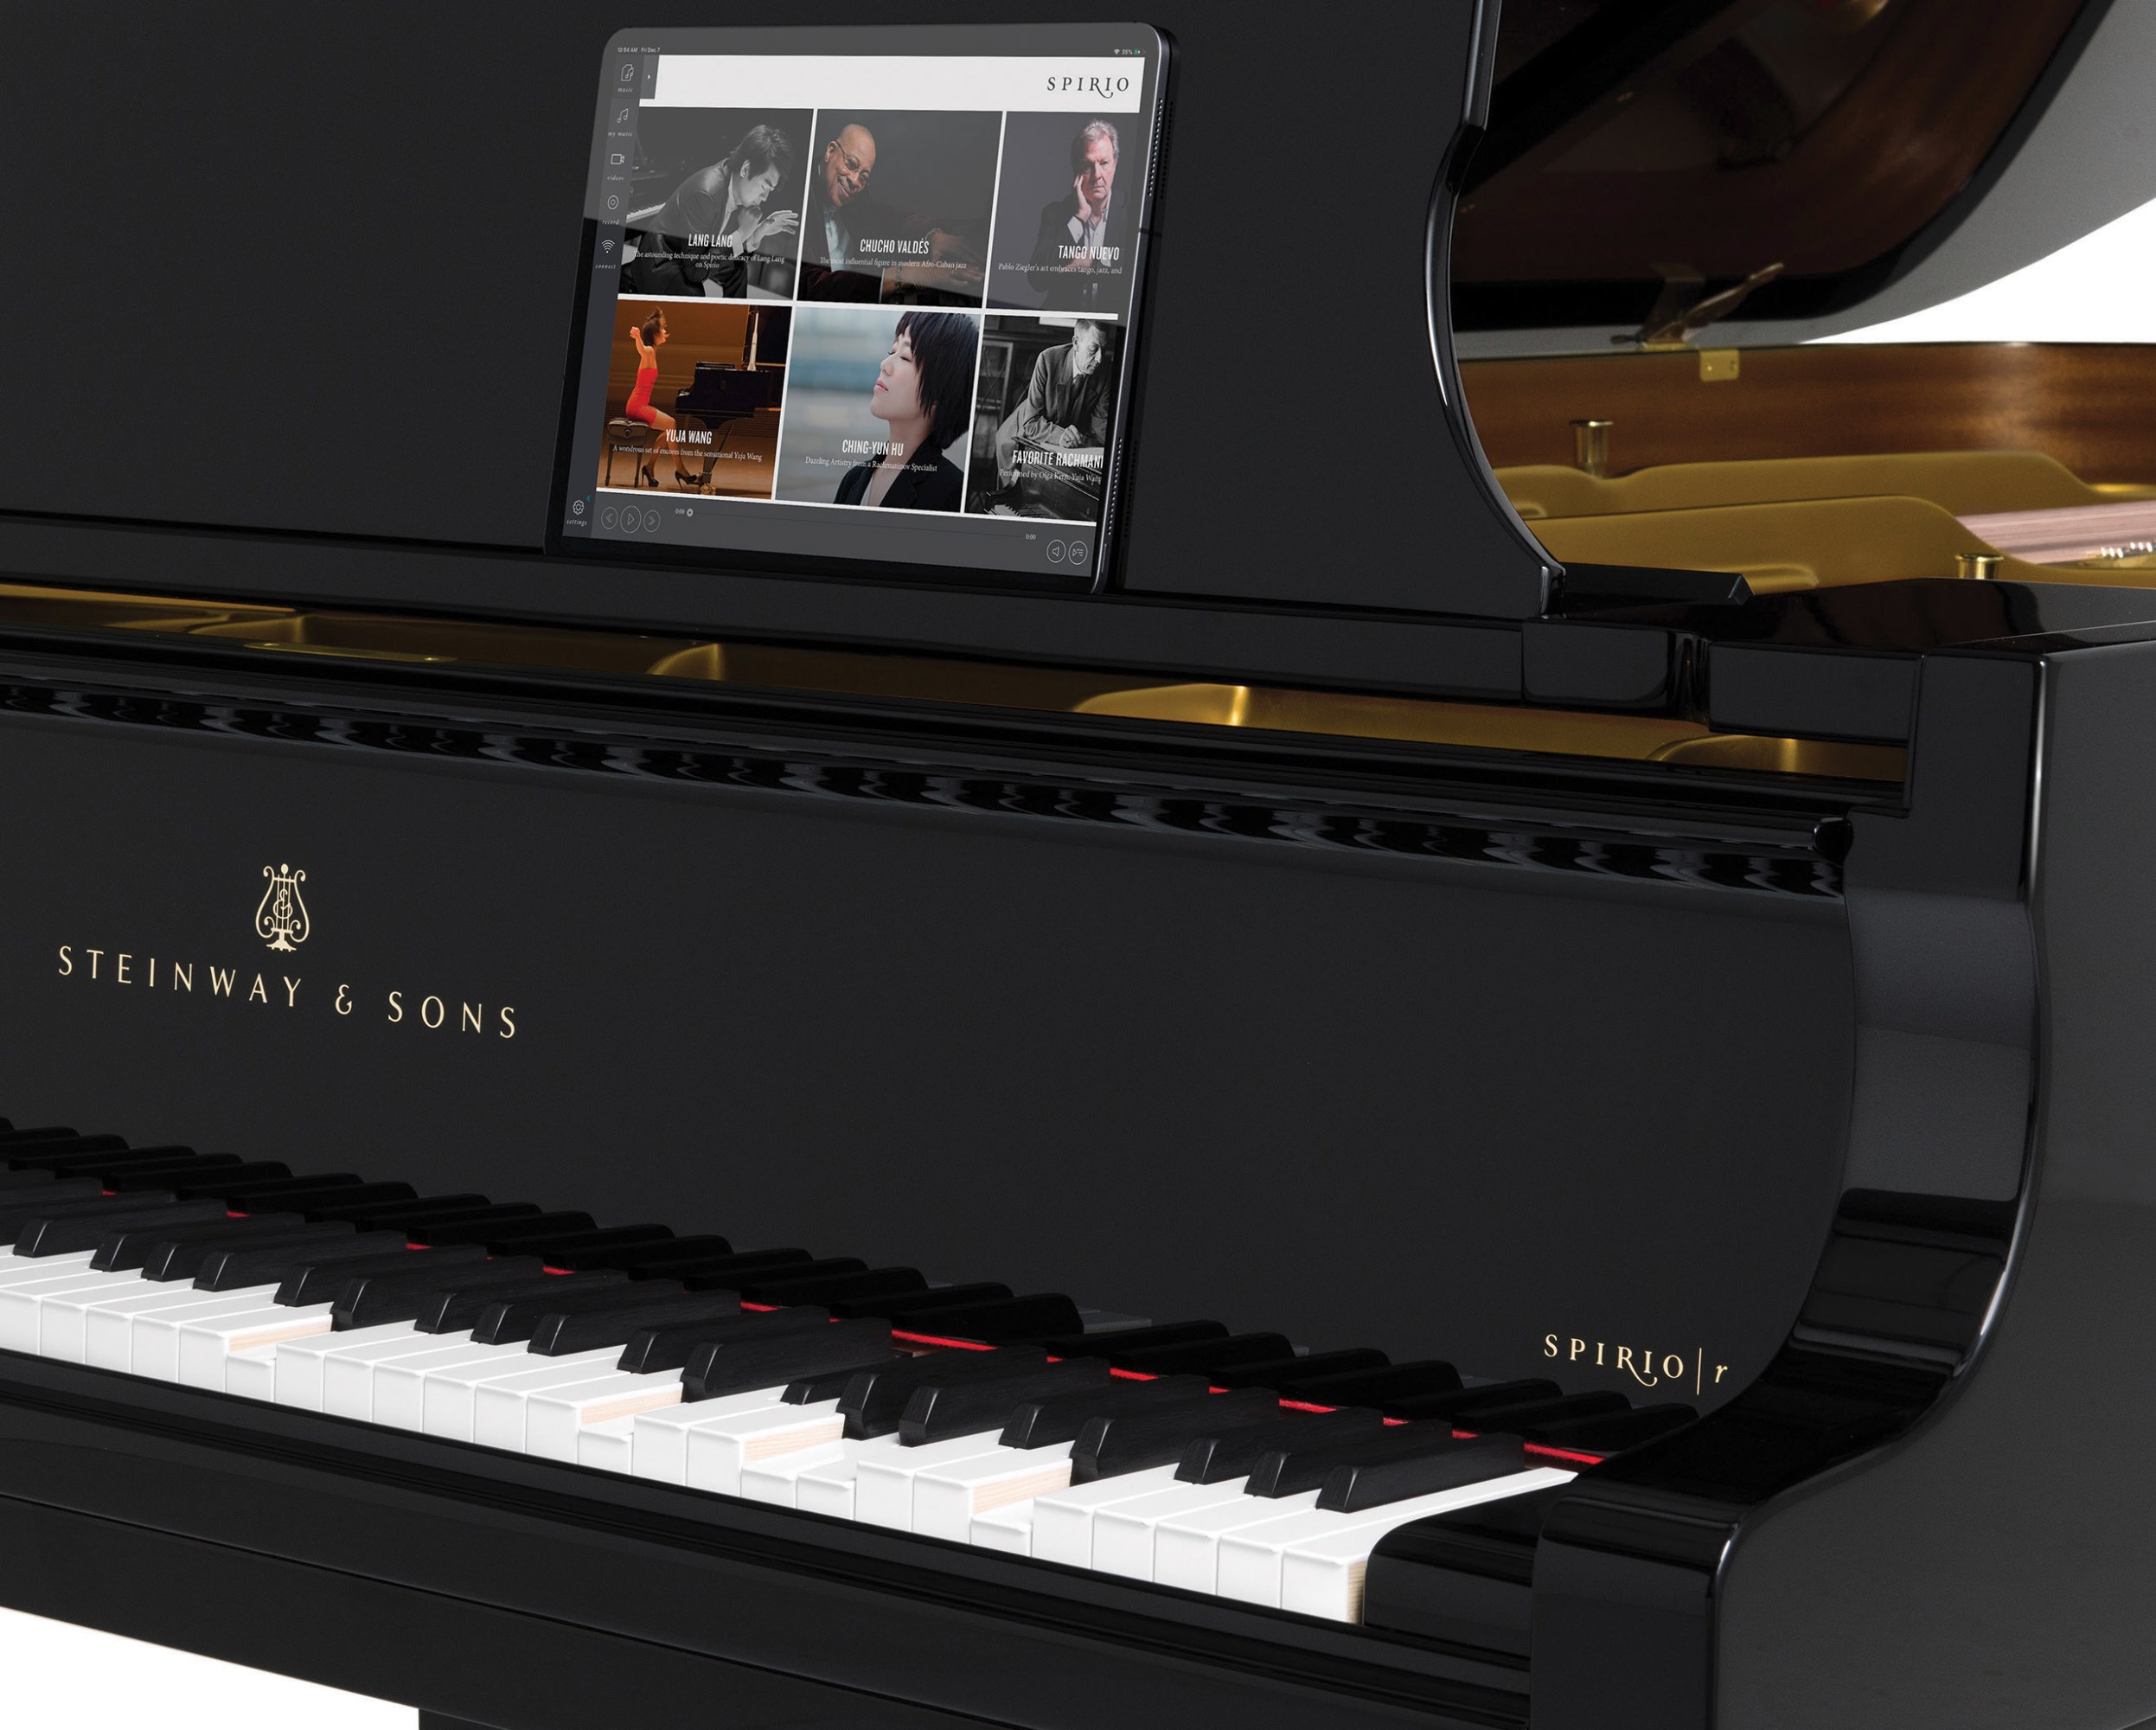 a Steinway piano with a tablet resting on the sheet music stand, showing a screen from the Spirio app with 6 options for songs